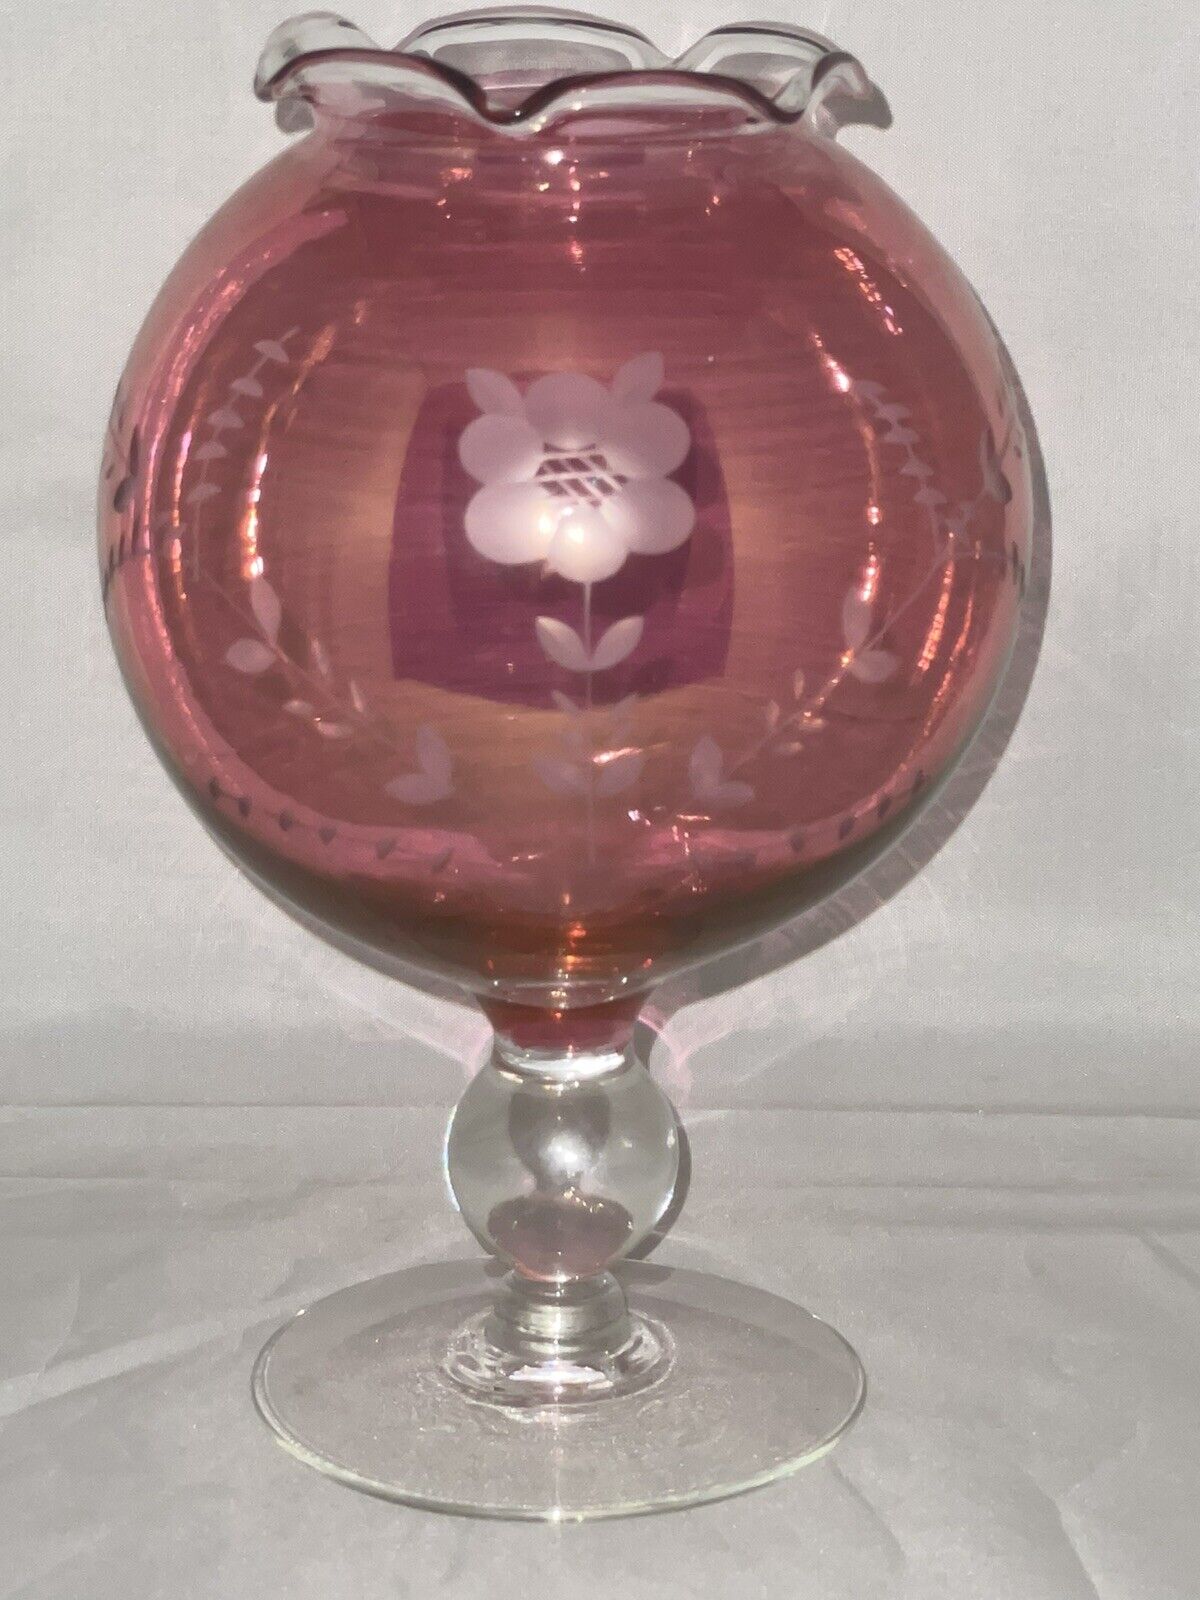 CRANBERRY GLASS VASE RUFFLE ART GLASS ETCHED FERN,BRANCHES,FLOWER